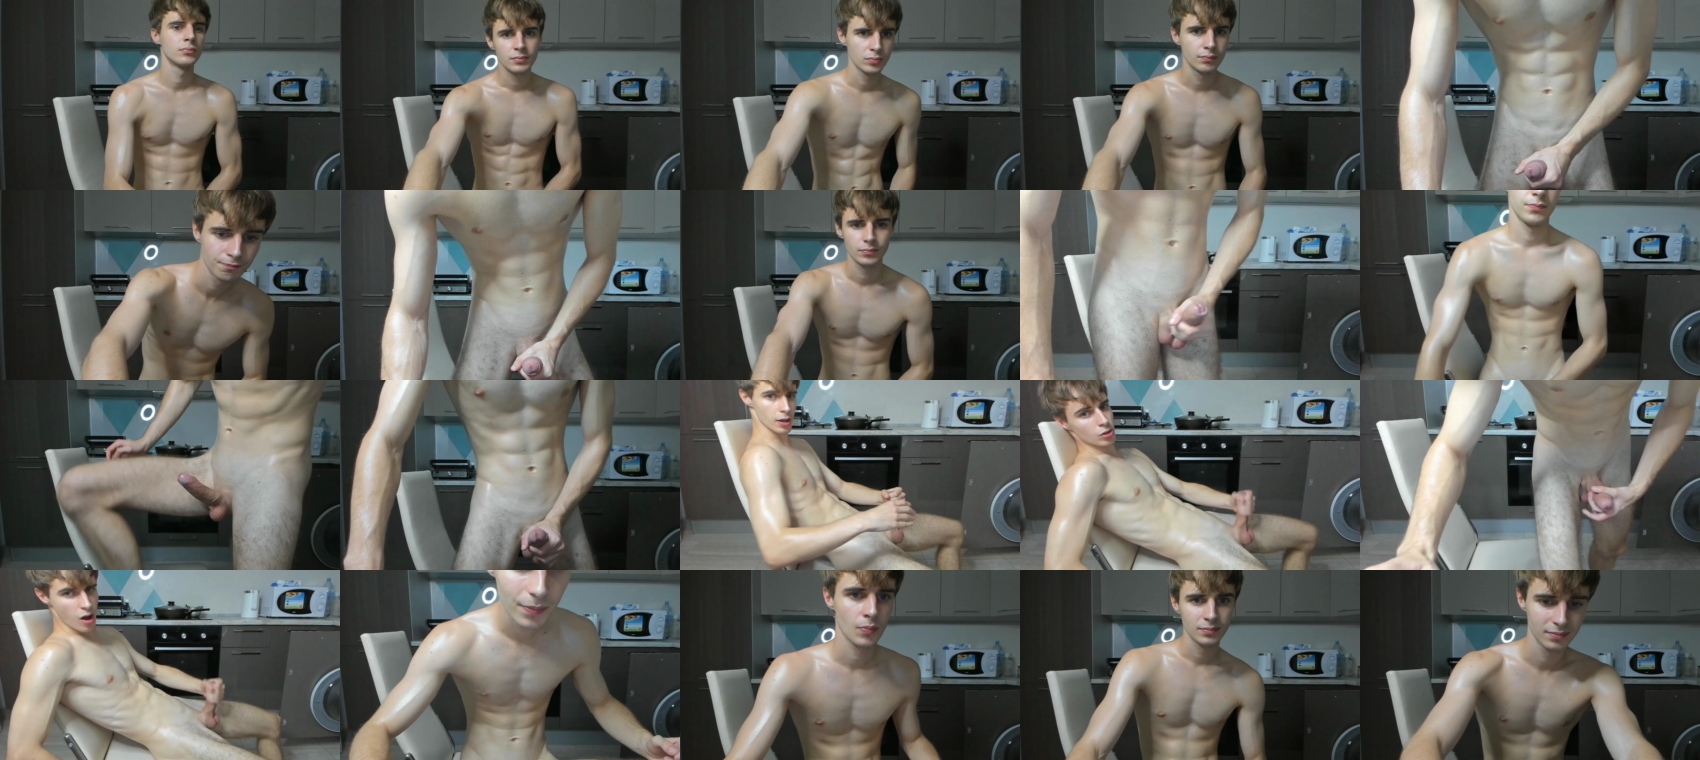 georges_place Show CAM SHOW @ Chaturbate 02-11-2022